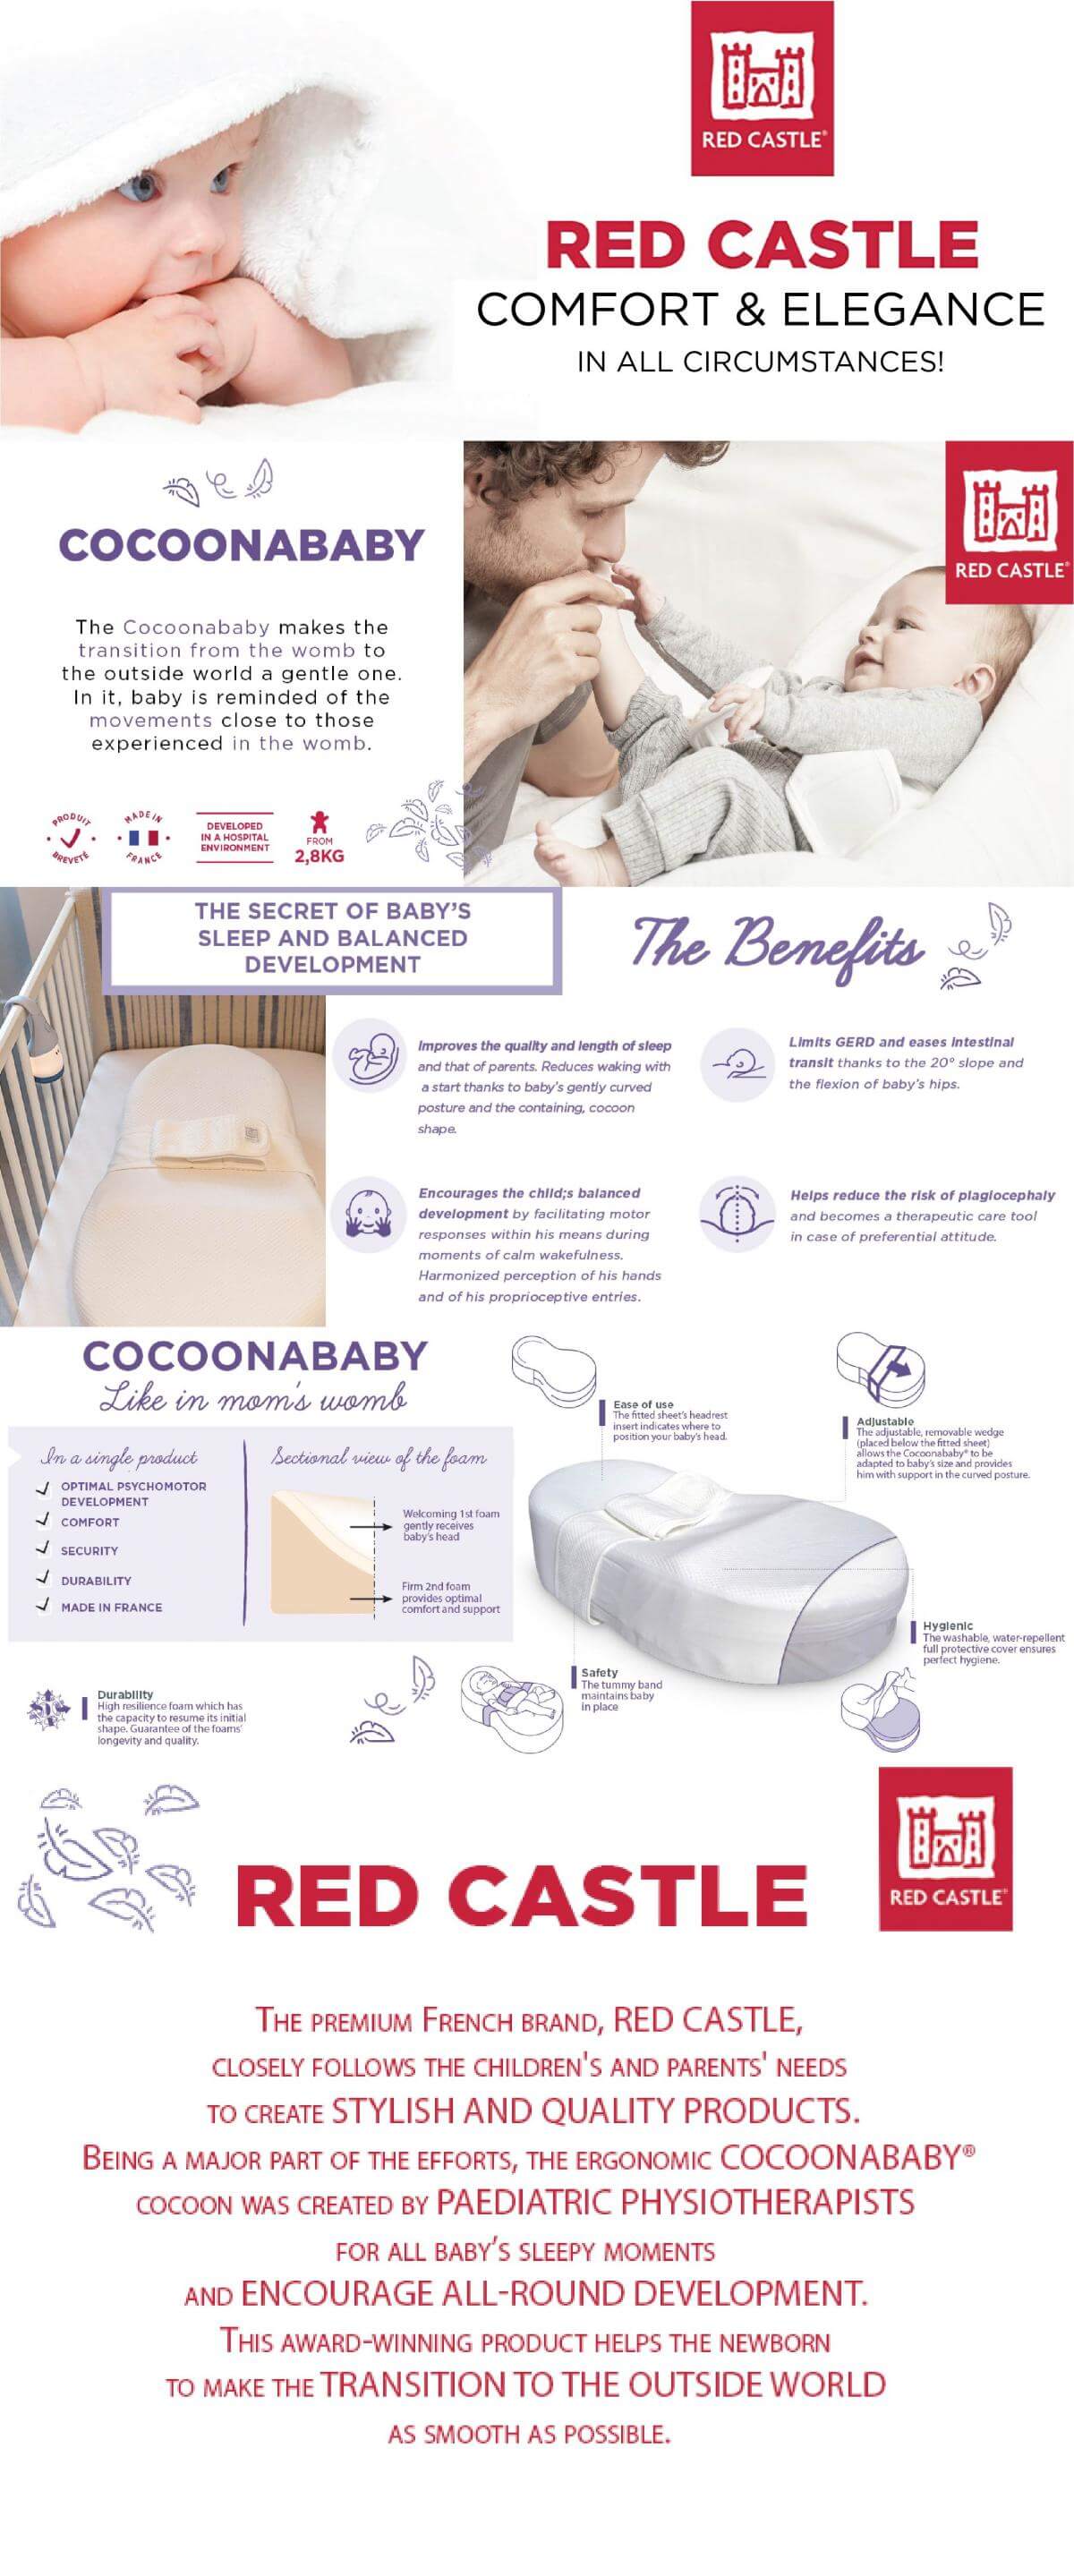 Red Castle  Cocoonababy Cocoonababy Nest with Fitted Sheet - (0-4